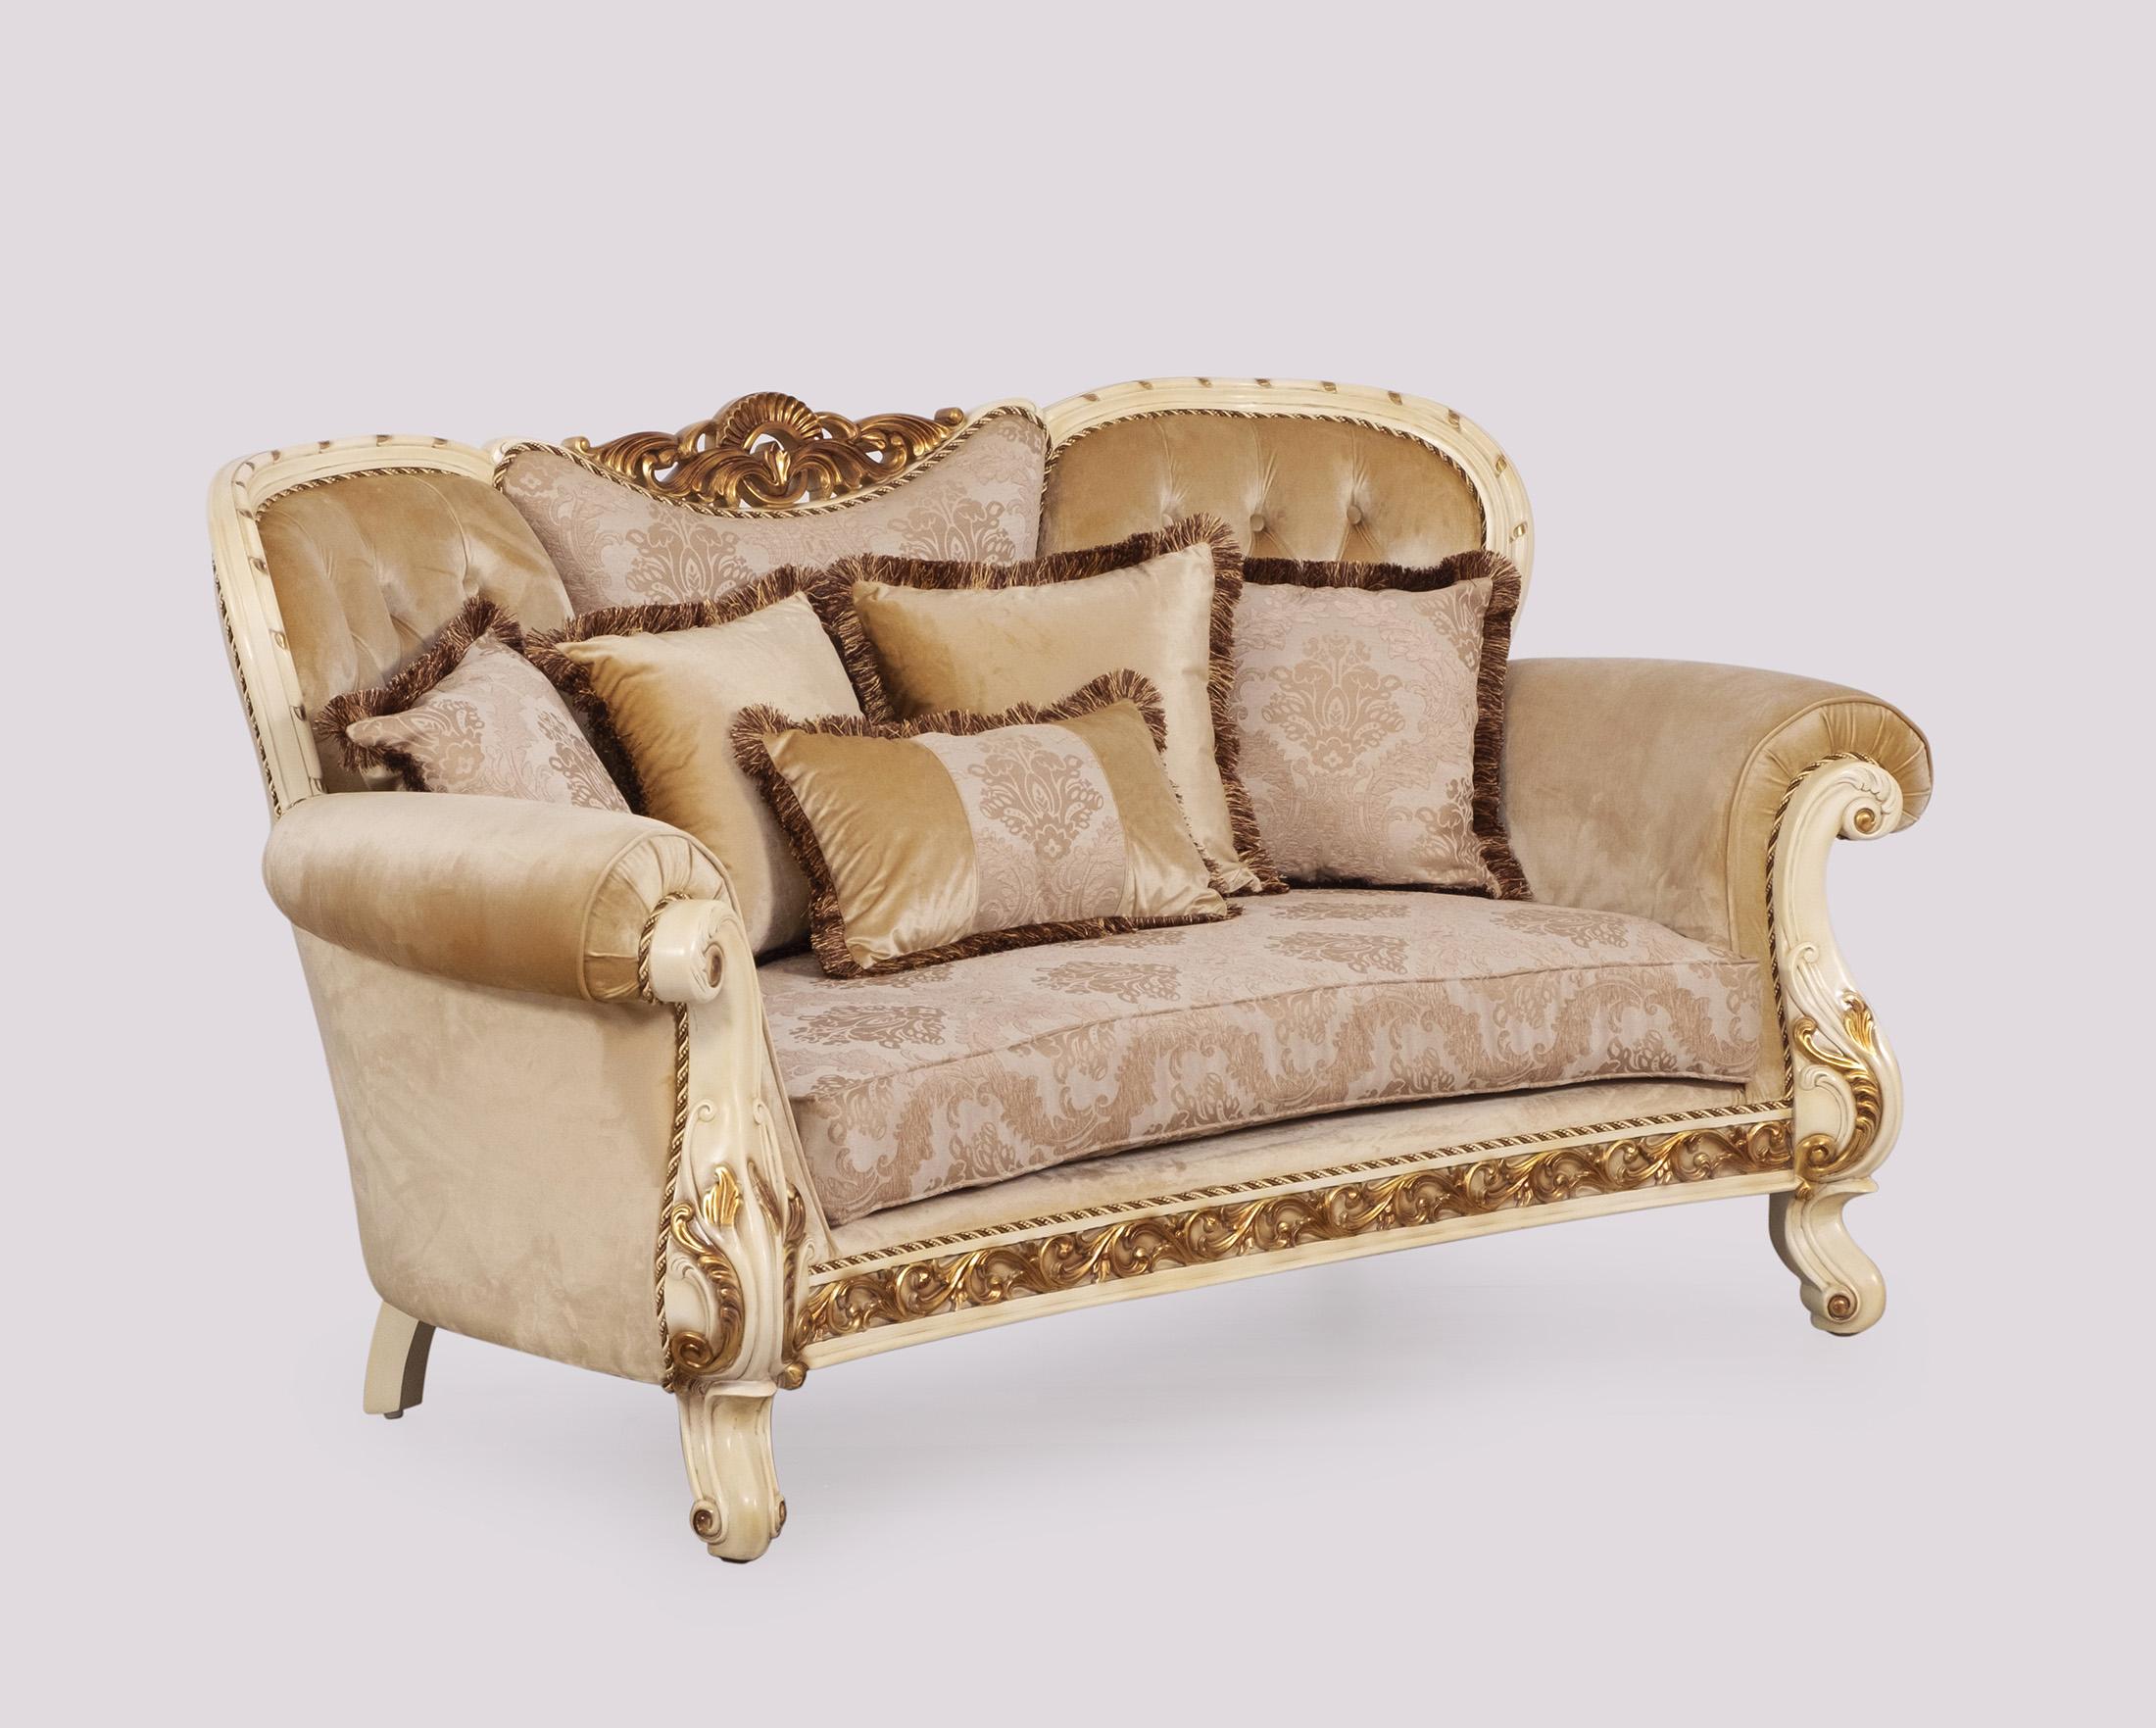 Classic, Traditional Loveseat FANTASIA 40017-L in Sand, Gold, Beige Fabric